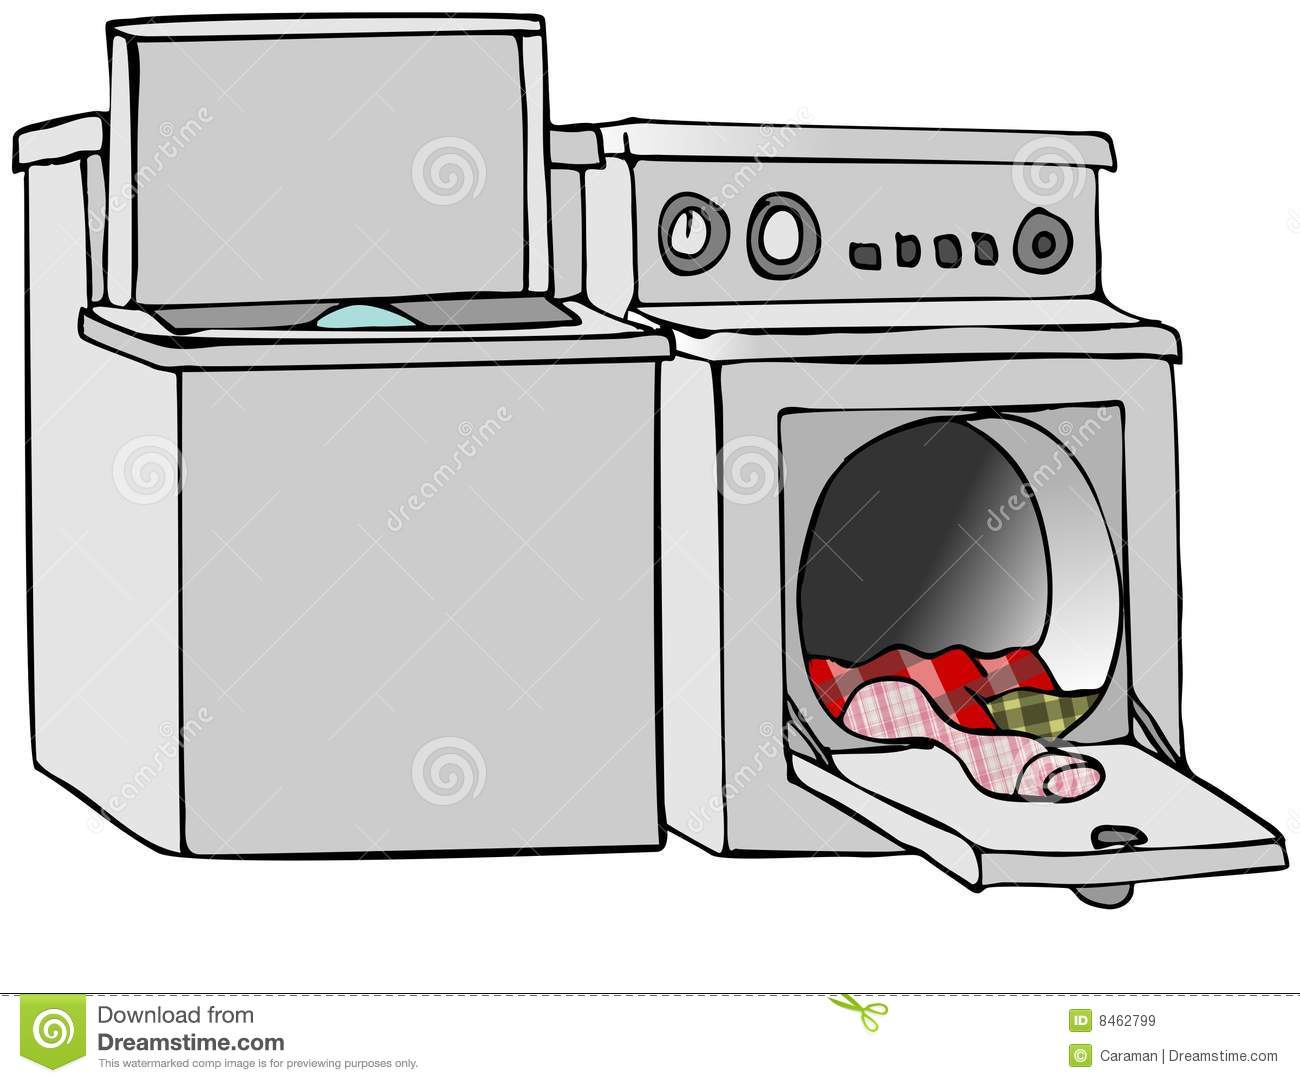 This Illustration Depicts A Washing Machine And Clothes Dryer With